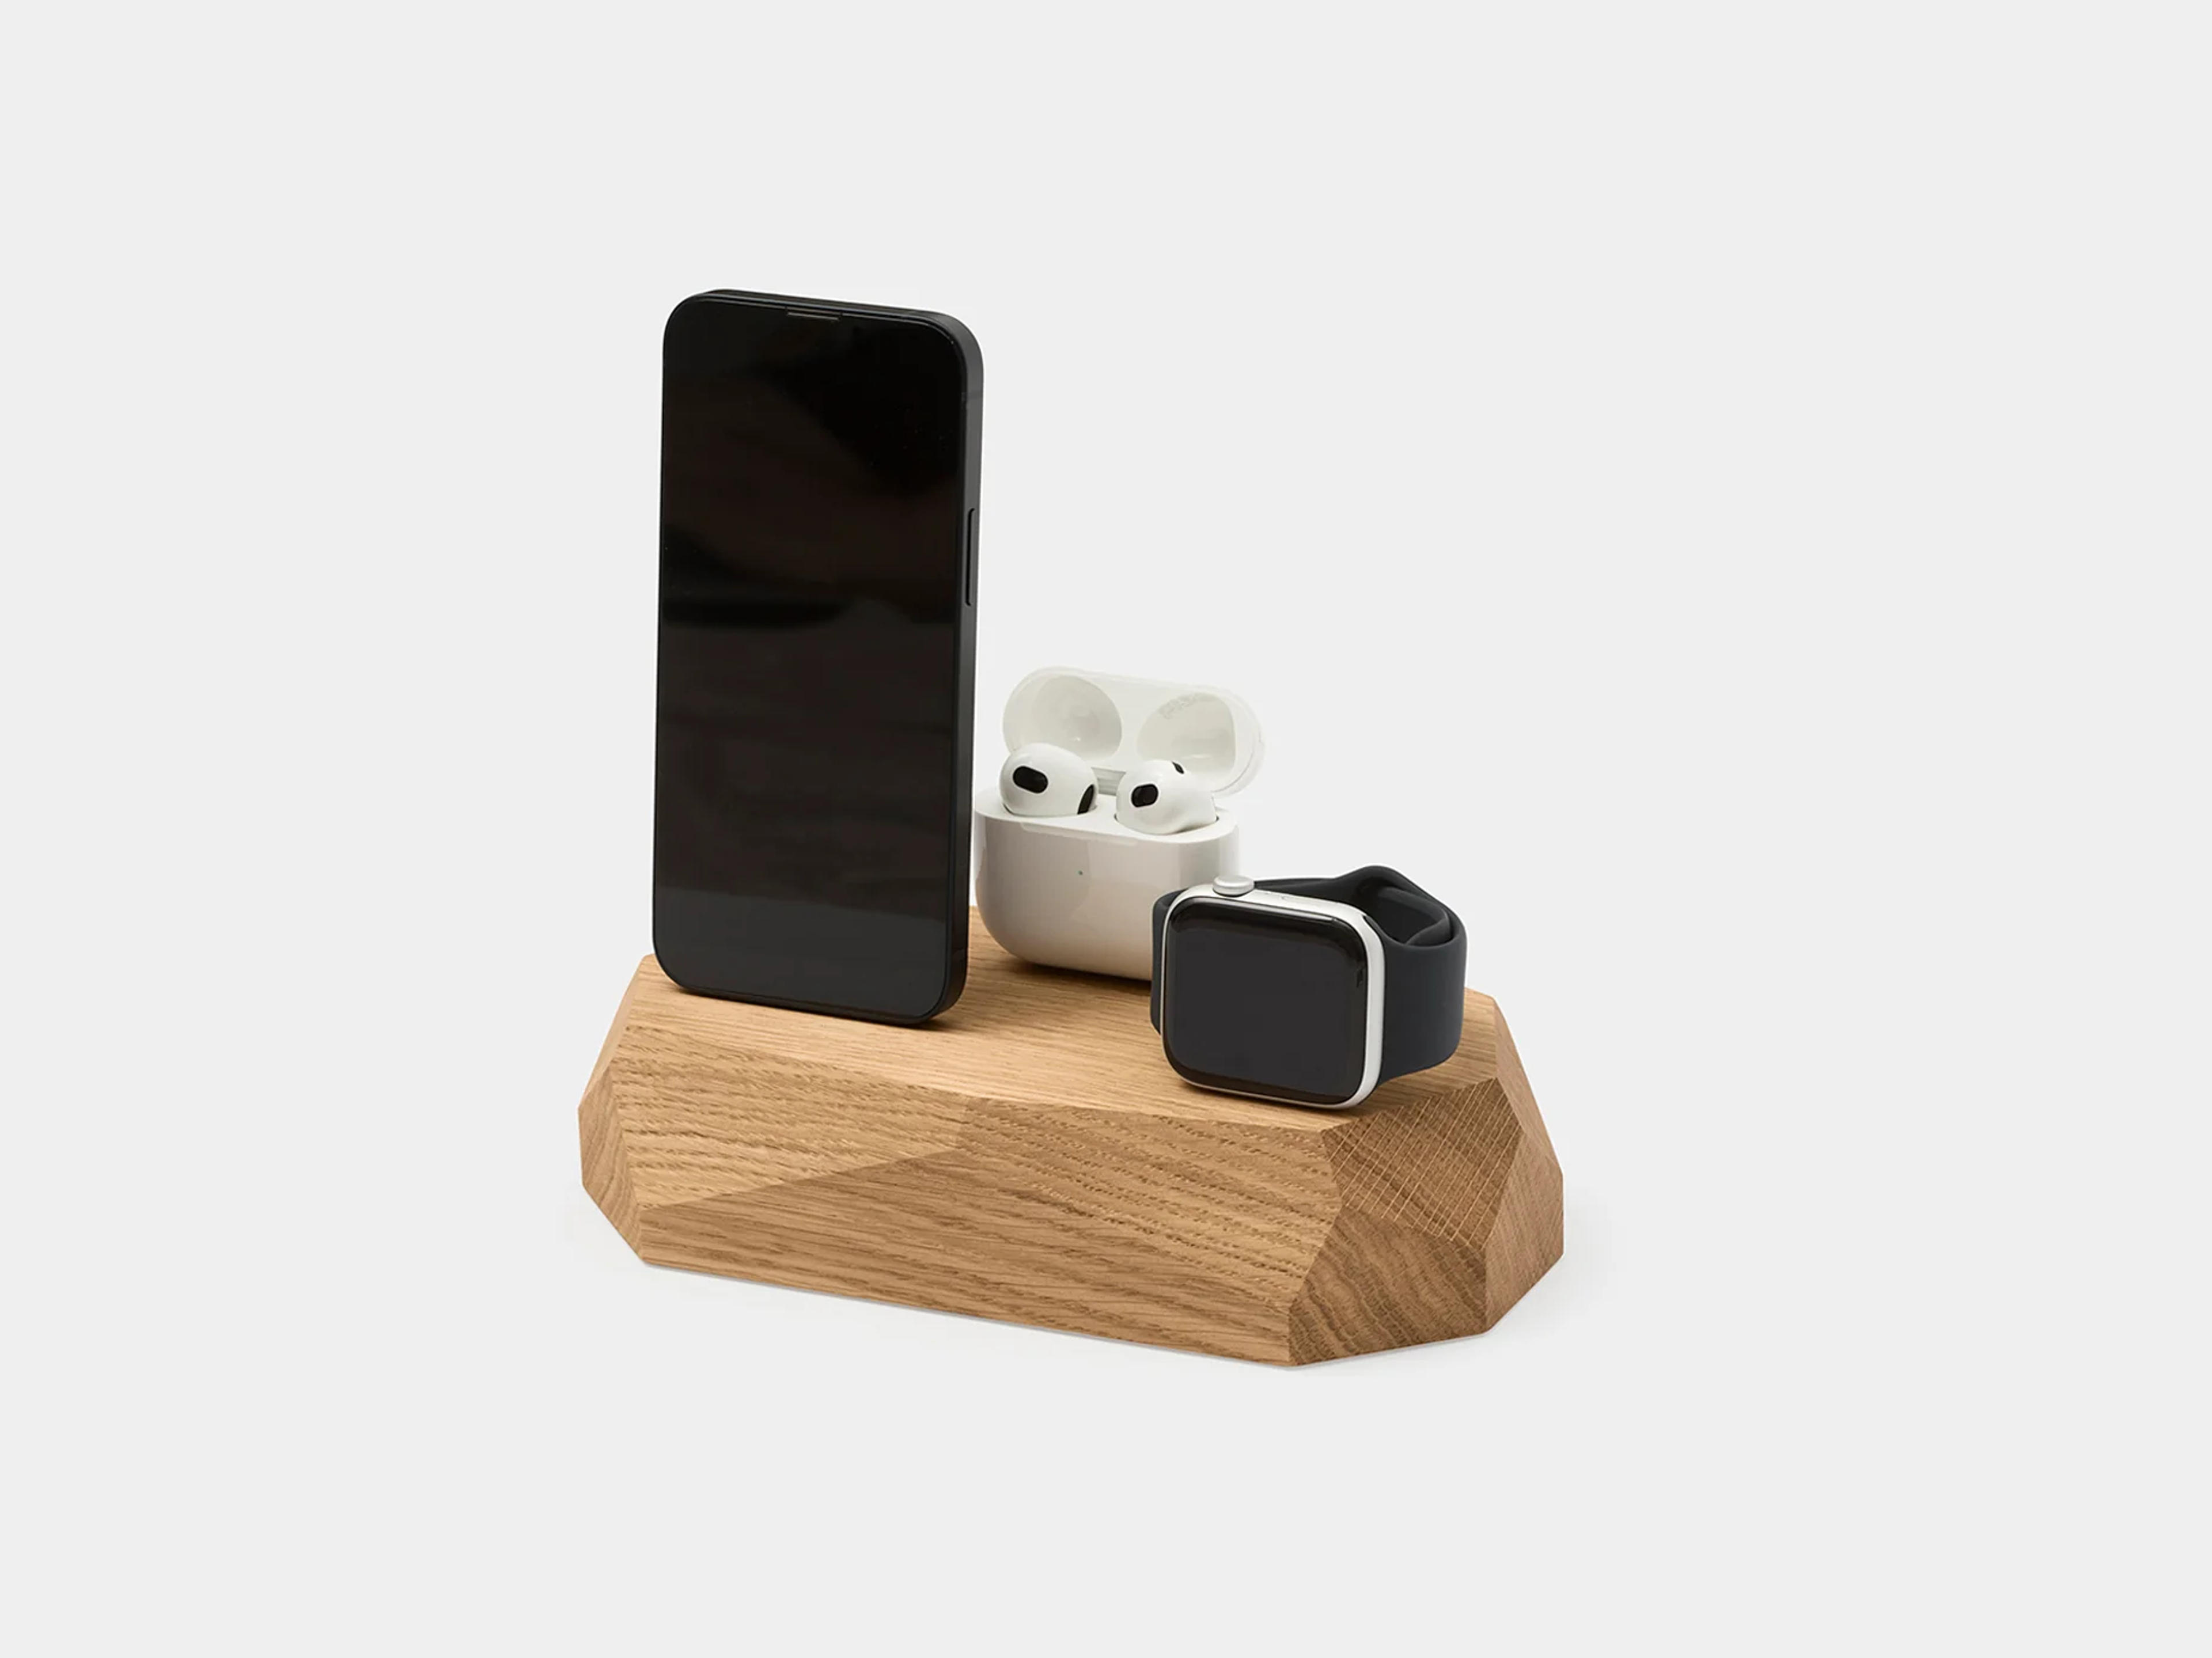 Triple dock - iPhone, Apple Watch, AirPods Charger 3 in 1 | Oakywood.shop